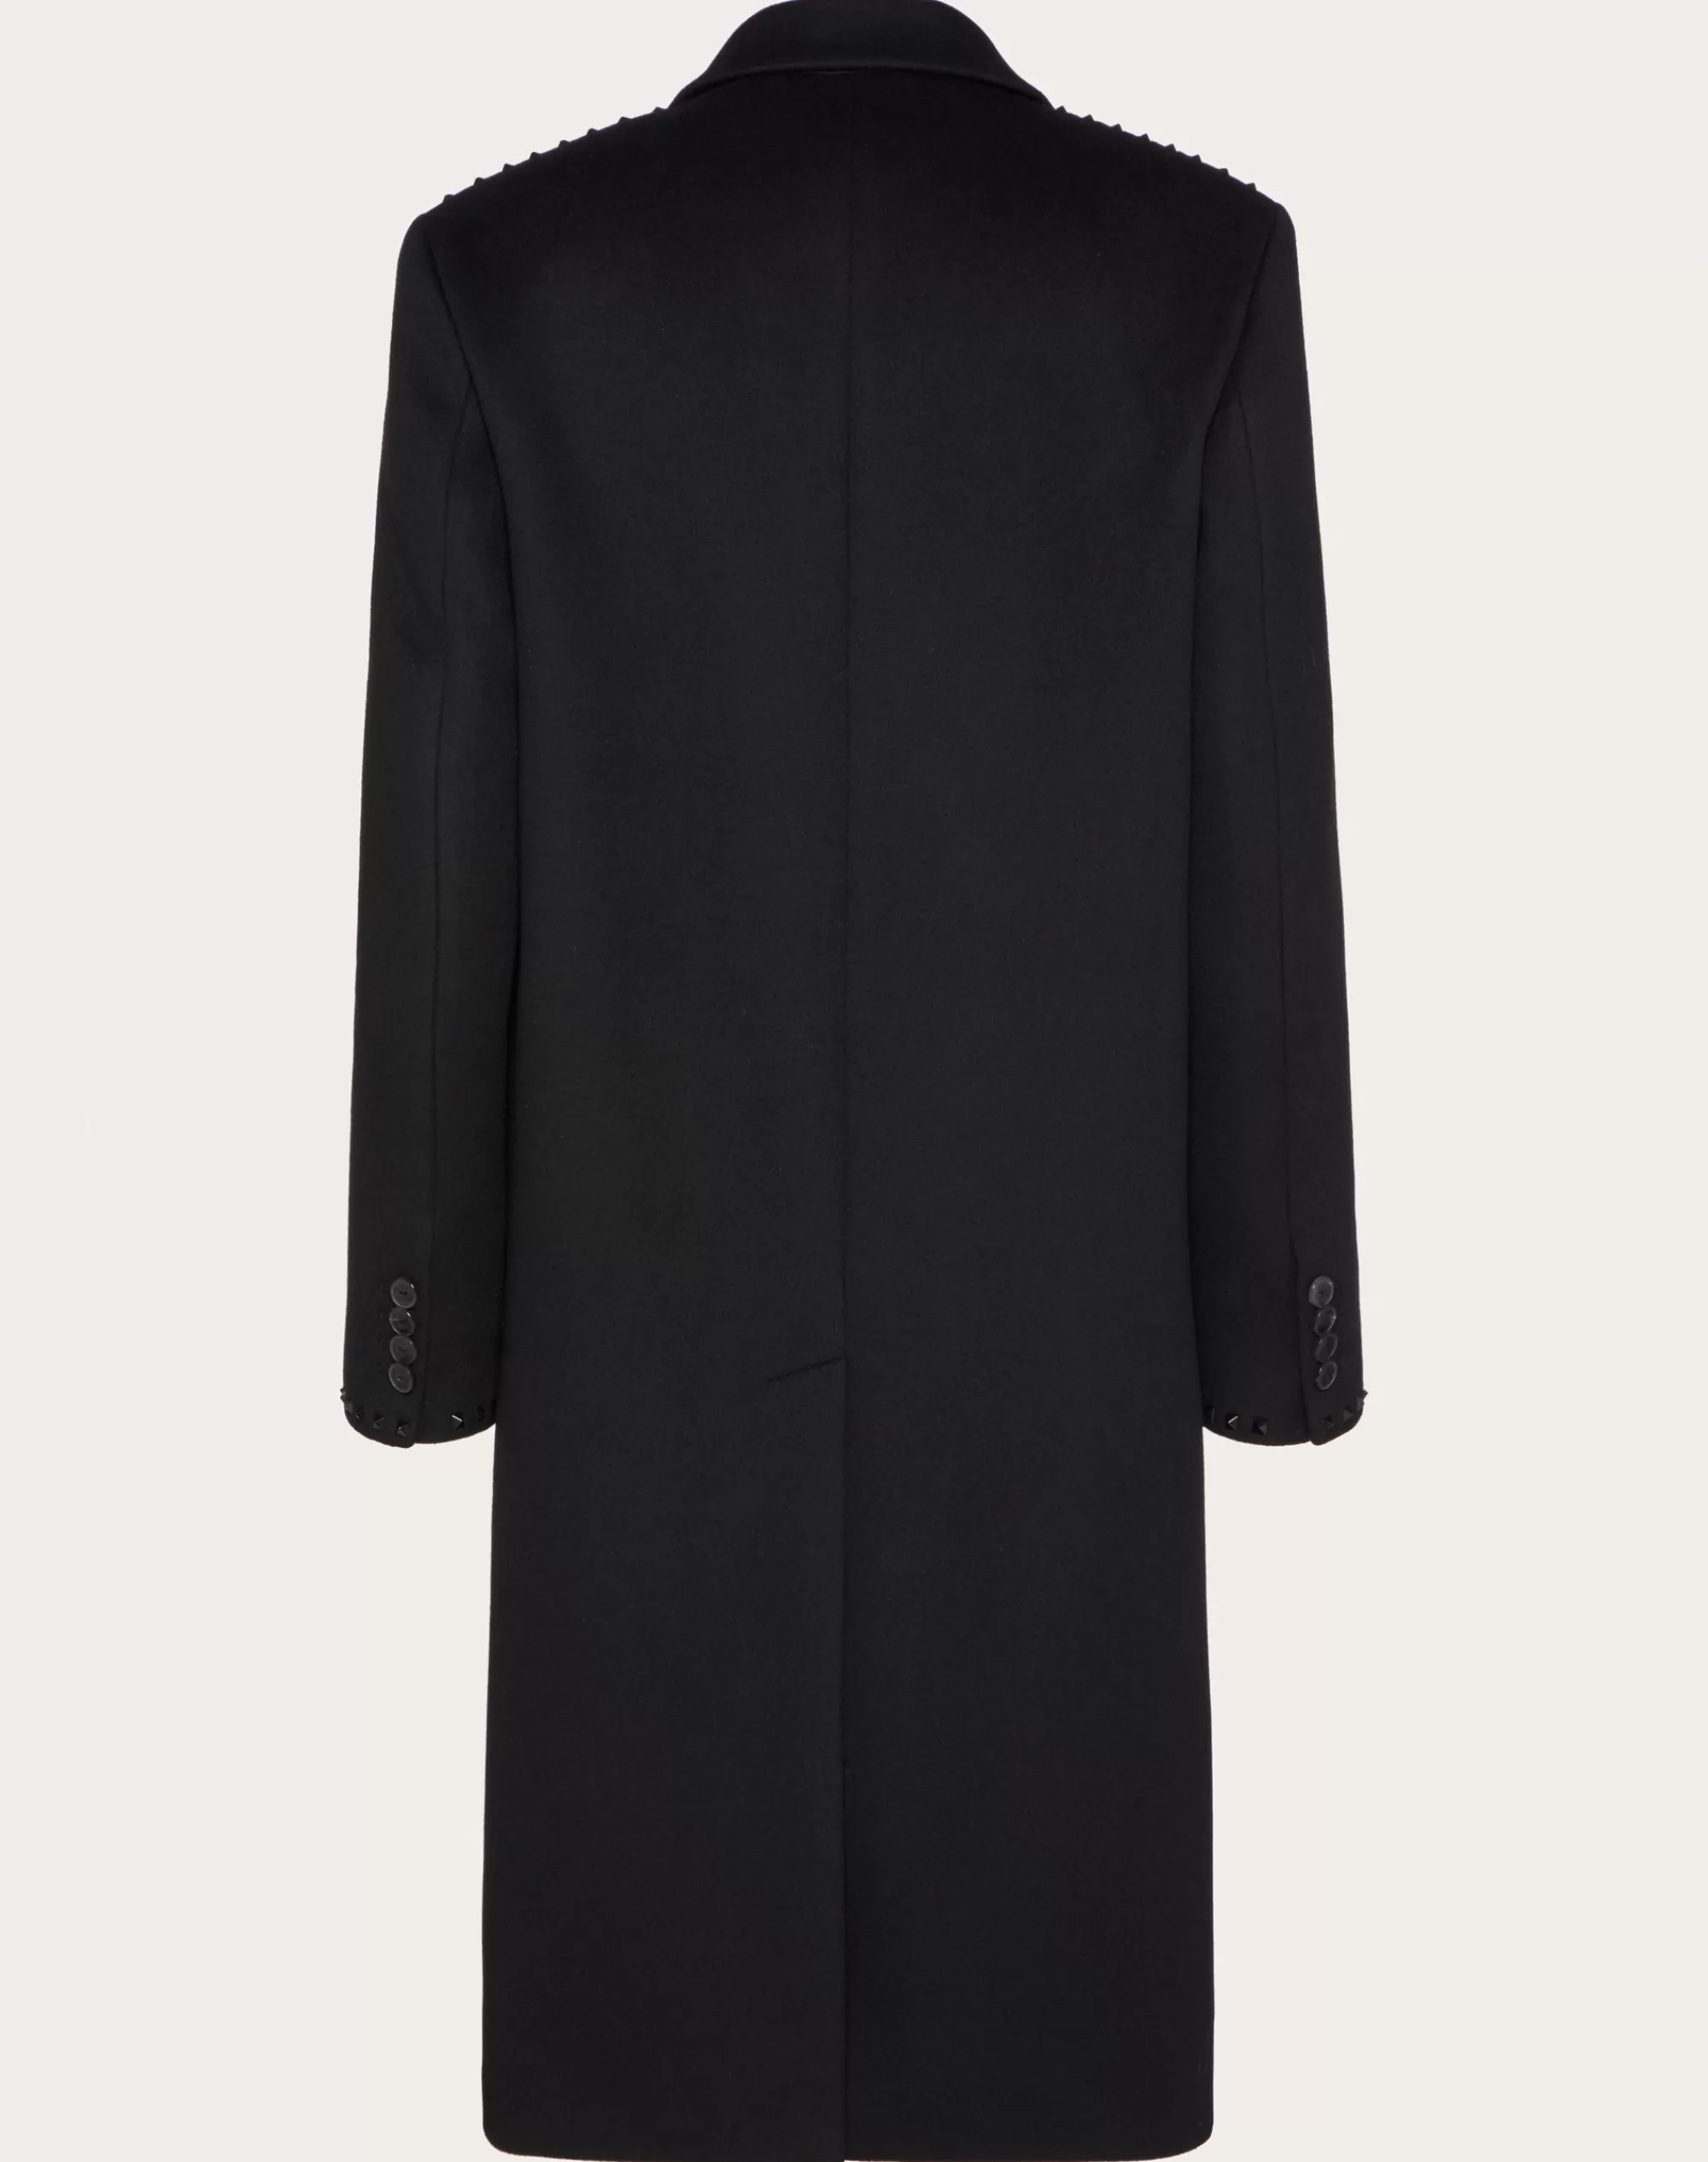 Valentino SINGLE BREASTED COAT IN DOUBLE-FACED WOOL AND CASHMERE WITH UNTITLED STUDS Black Sale